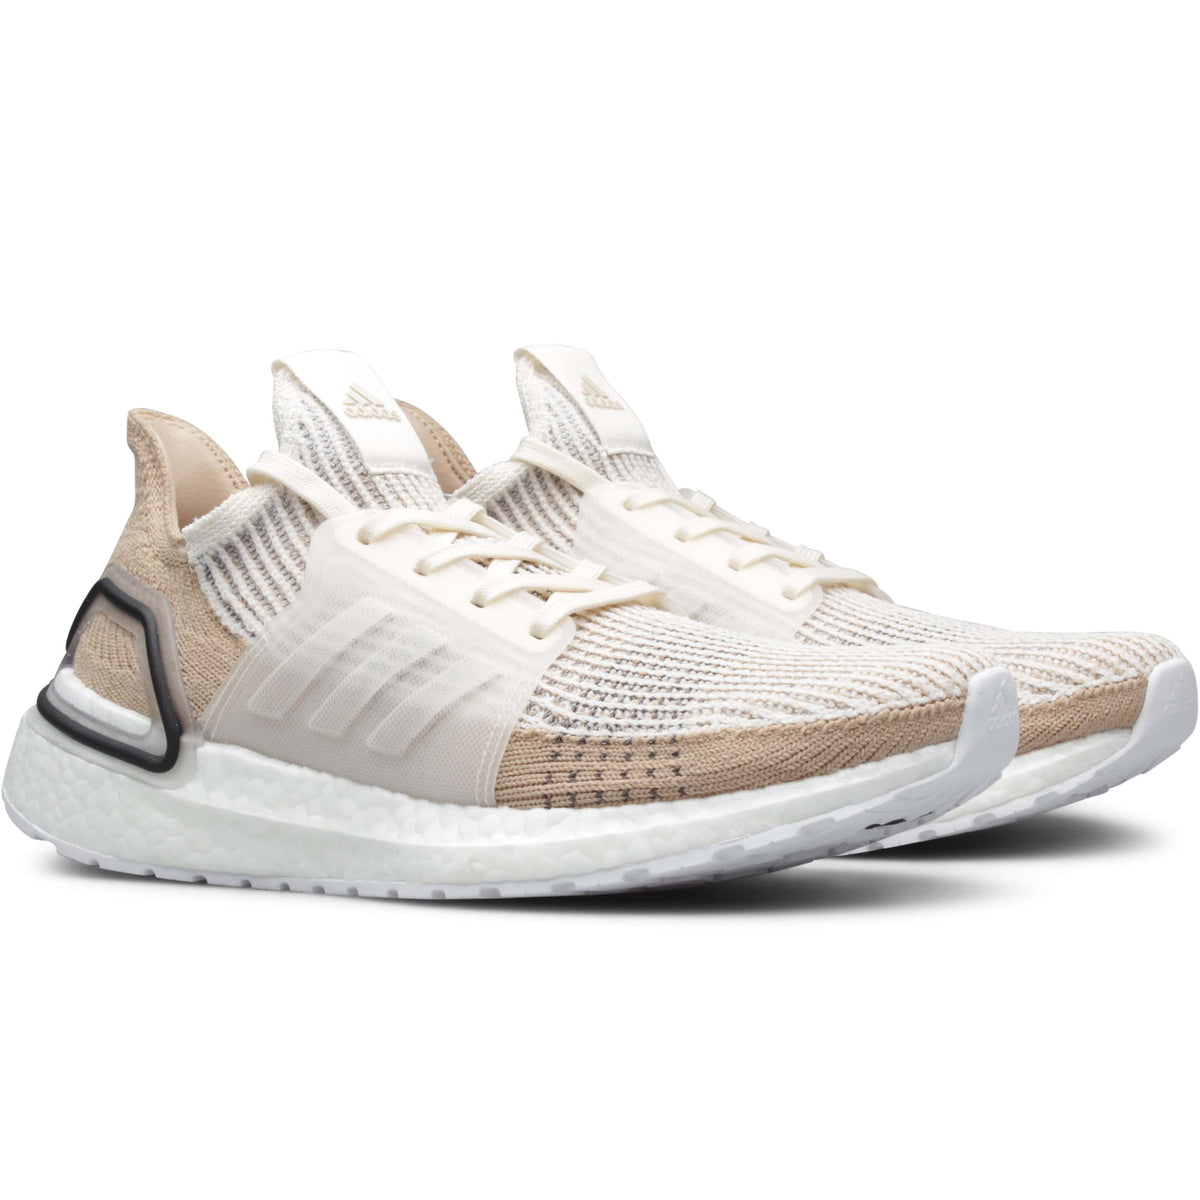 adidas ultra boost 2019 chalk white pale nude